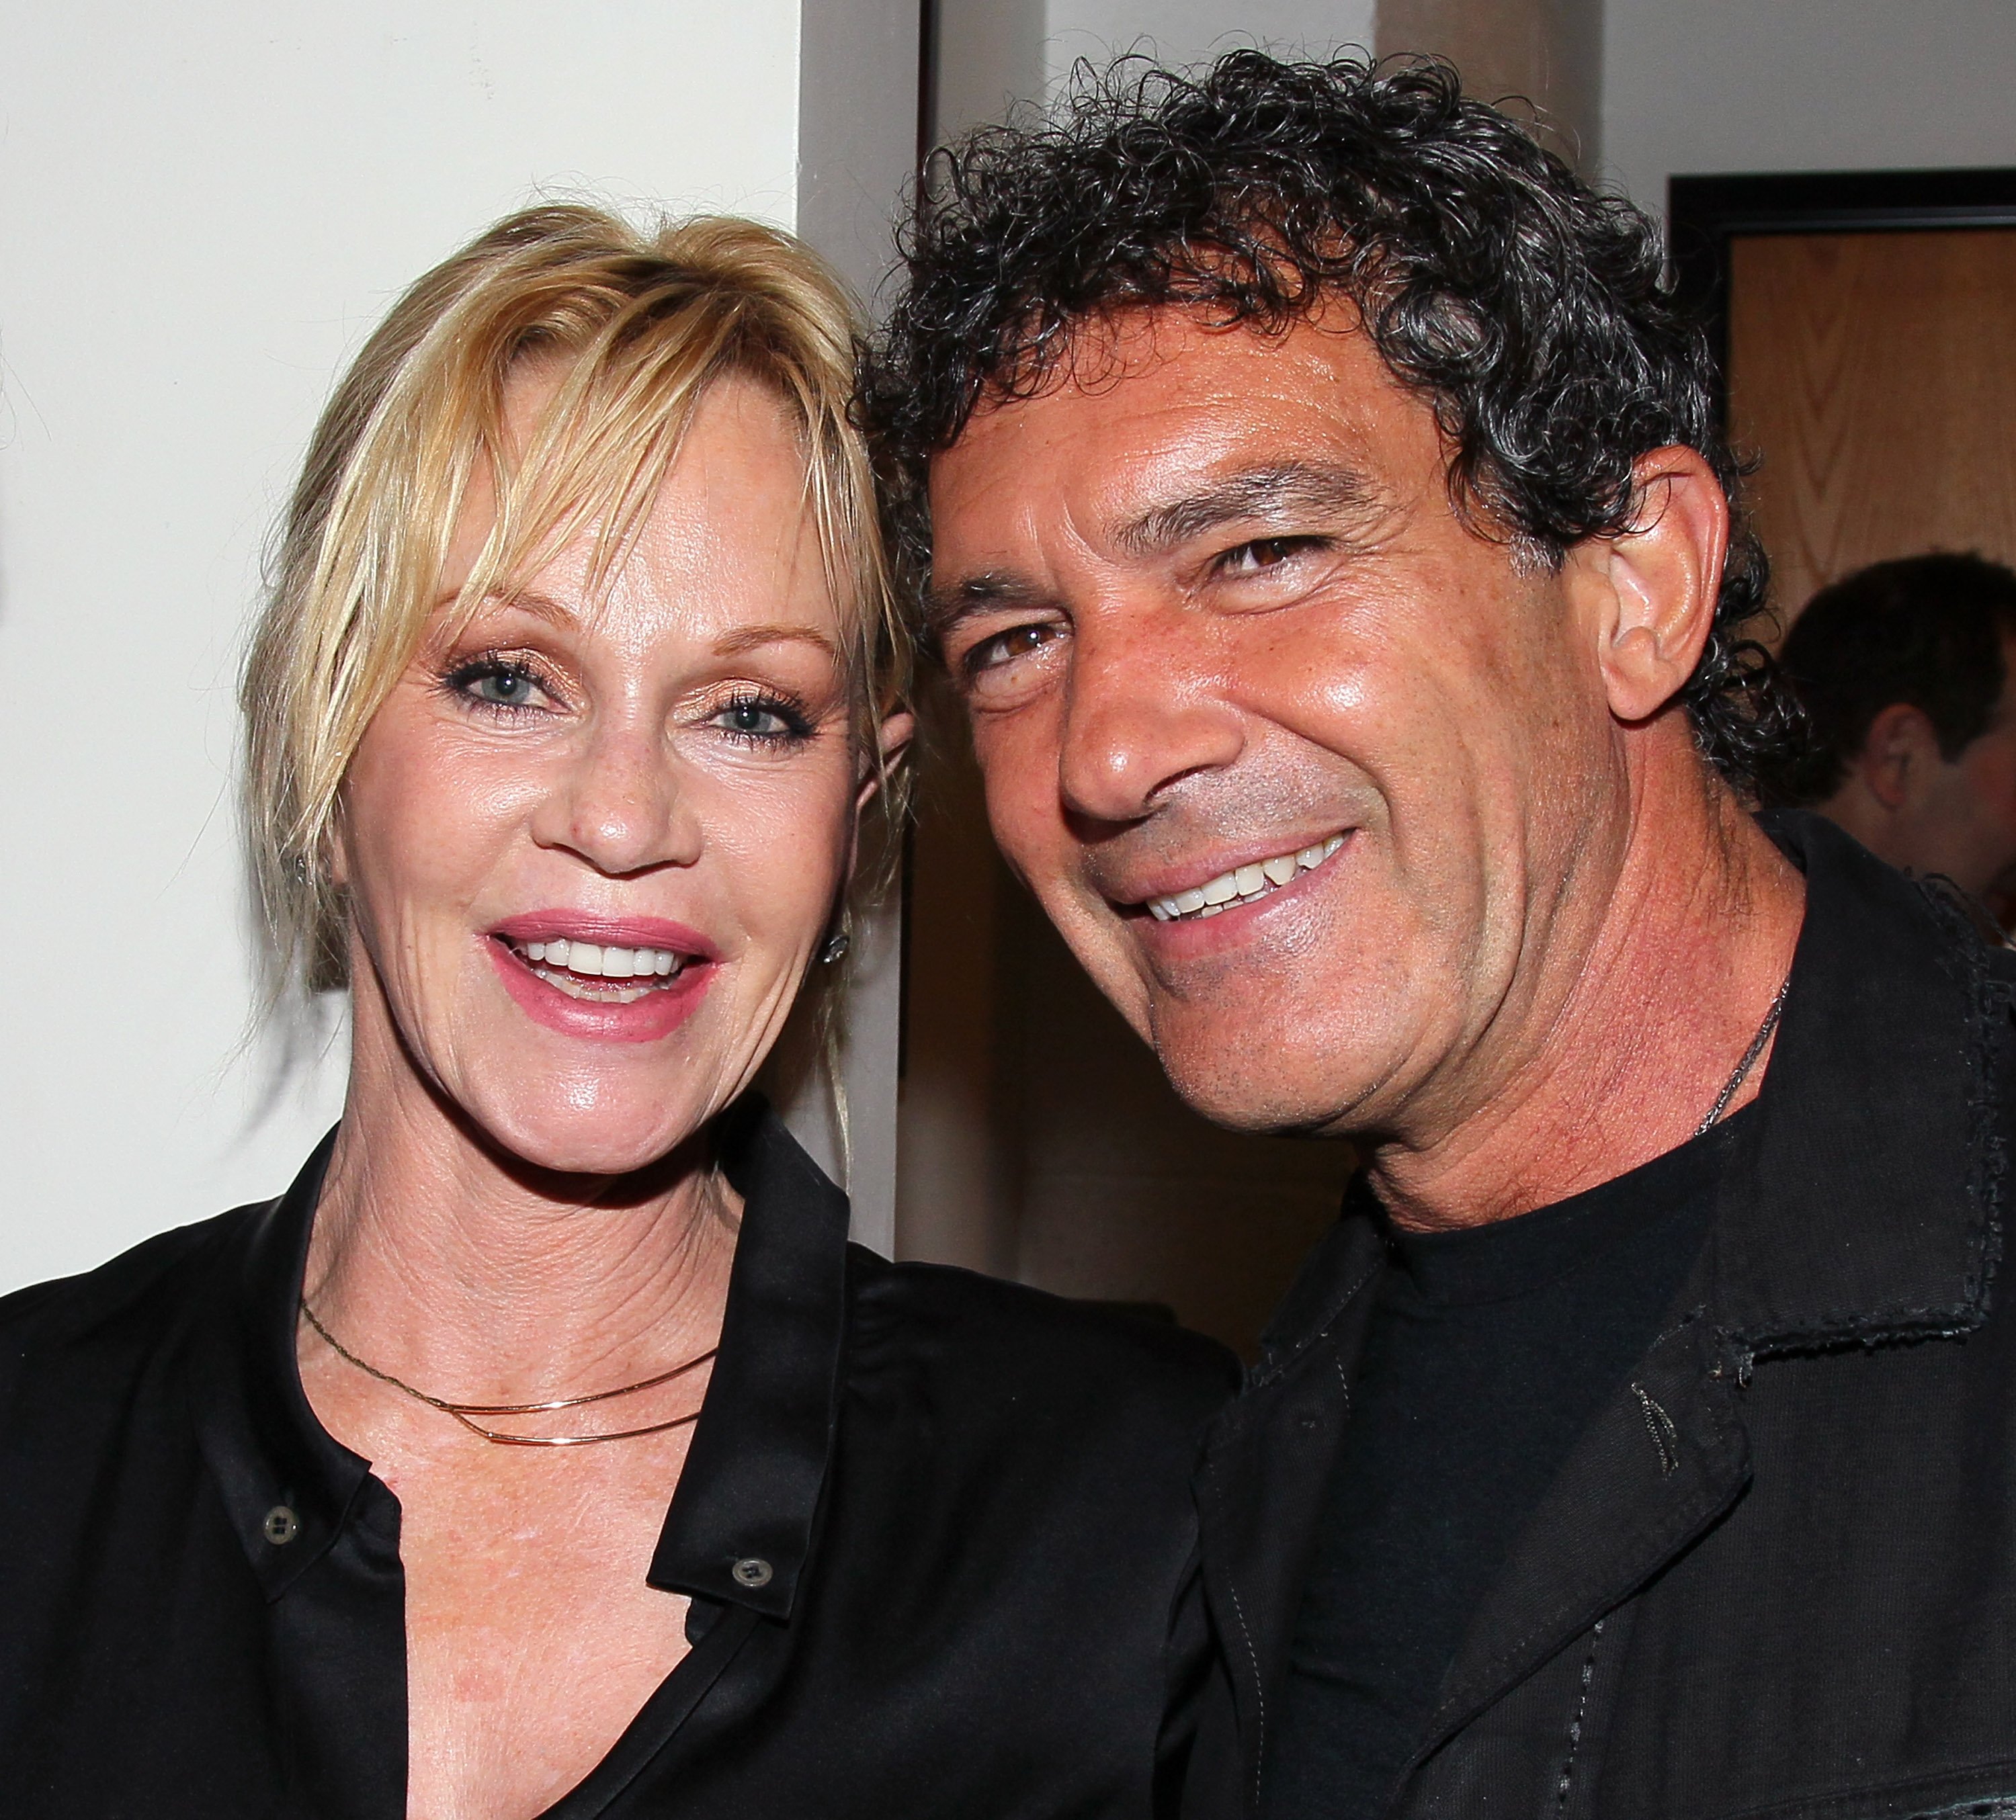 Melanie Griffith and husband actor Antonio Banderas posing at the opening night of "No Way Around But Through" at the Falcon Theatre on June 3, 2012, in Burbank, California | Source: Getty Images